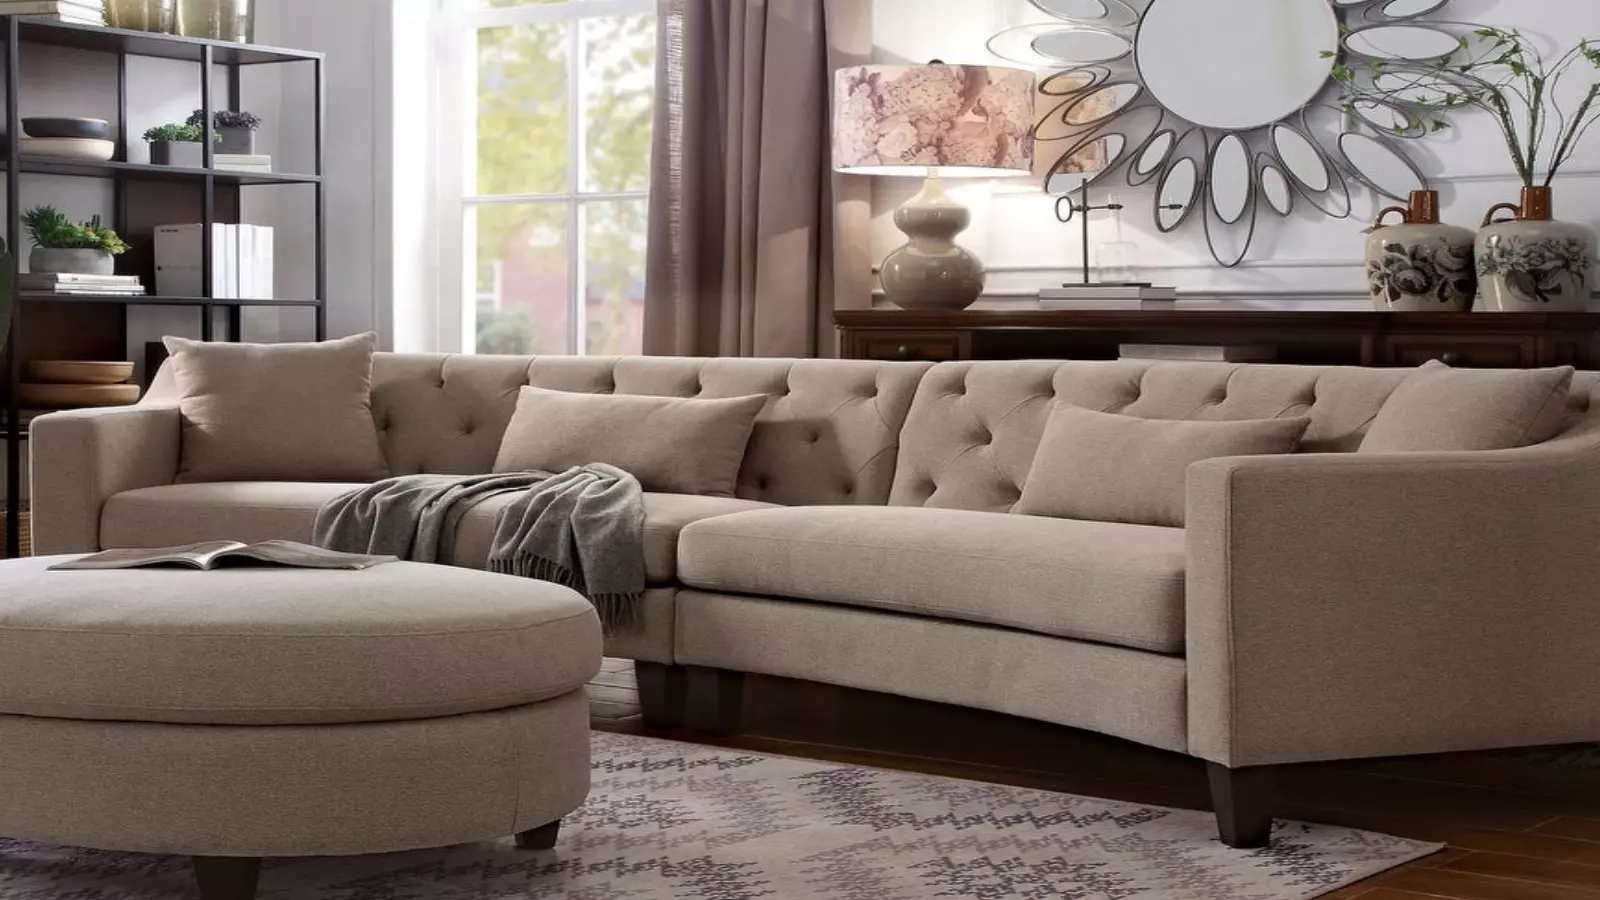 Curved sectional sofas like this one from Overstock are very in.